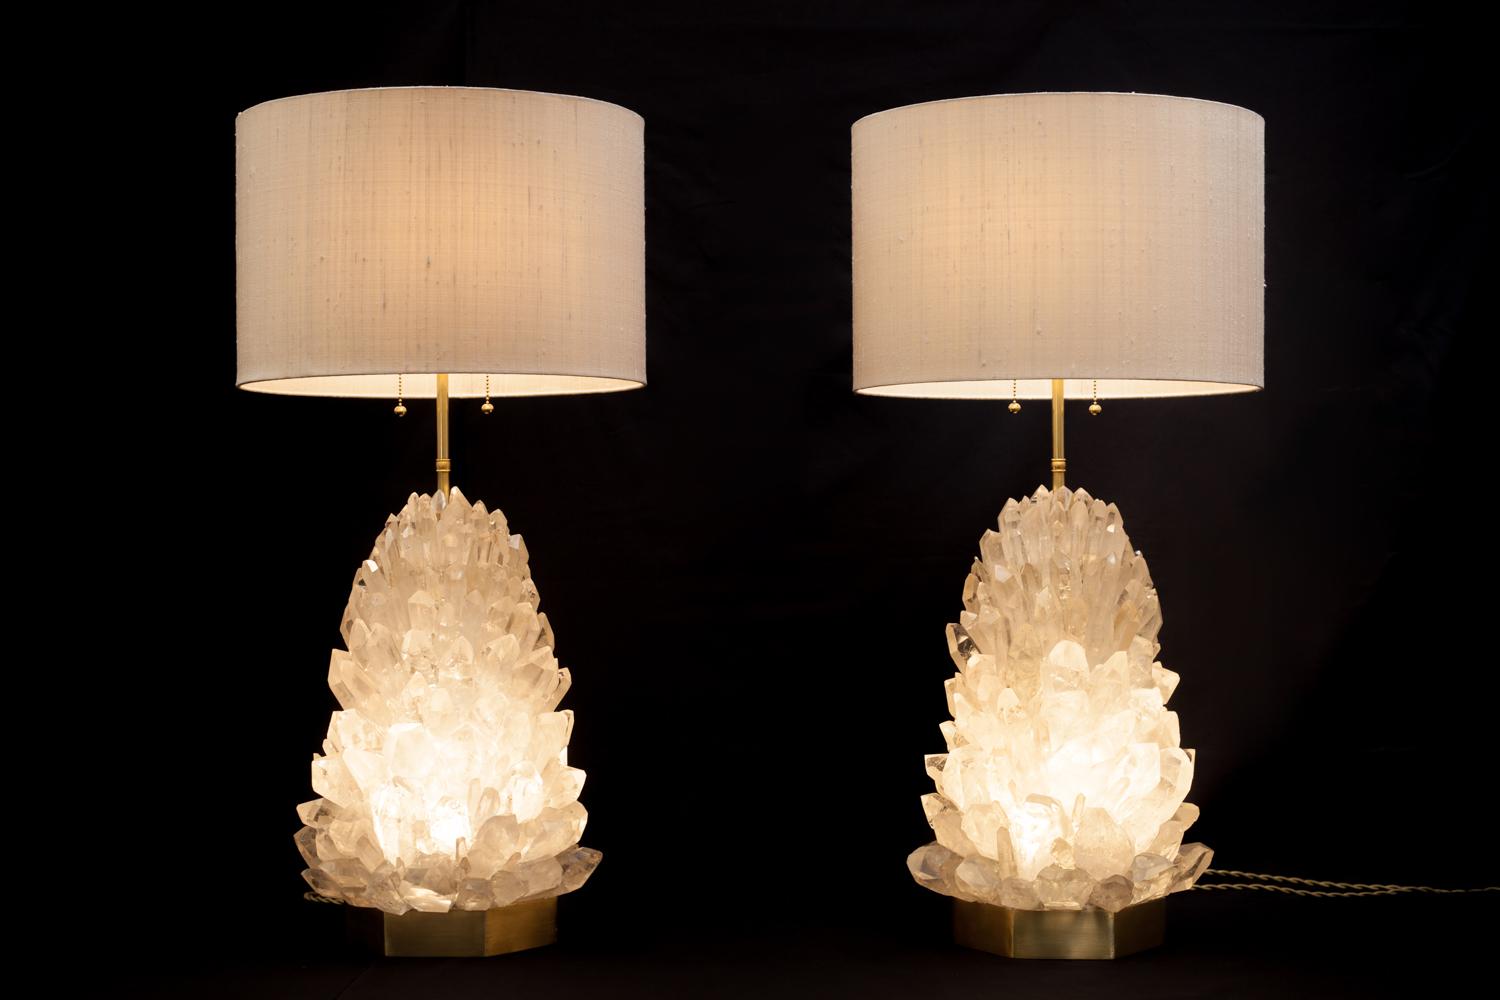 Organic Modern Pair of Natural Crystal Table Lamps, Signed by Demian Quincke